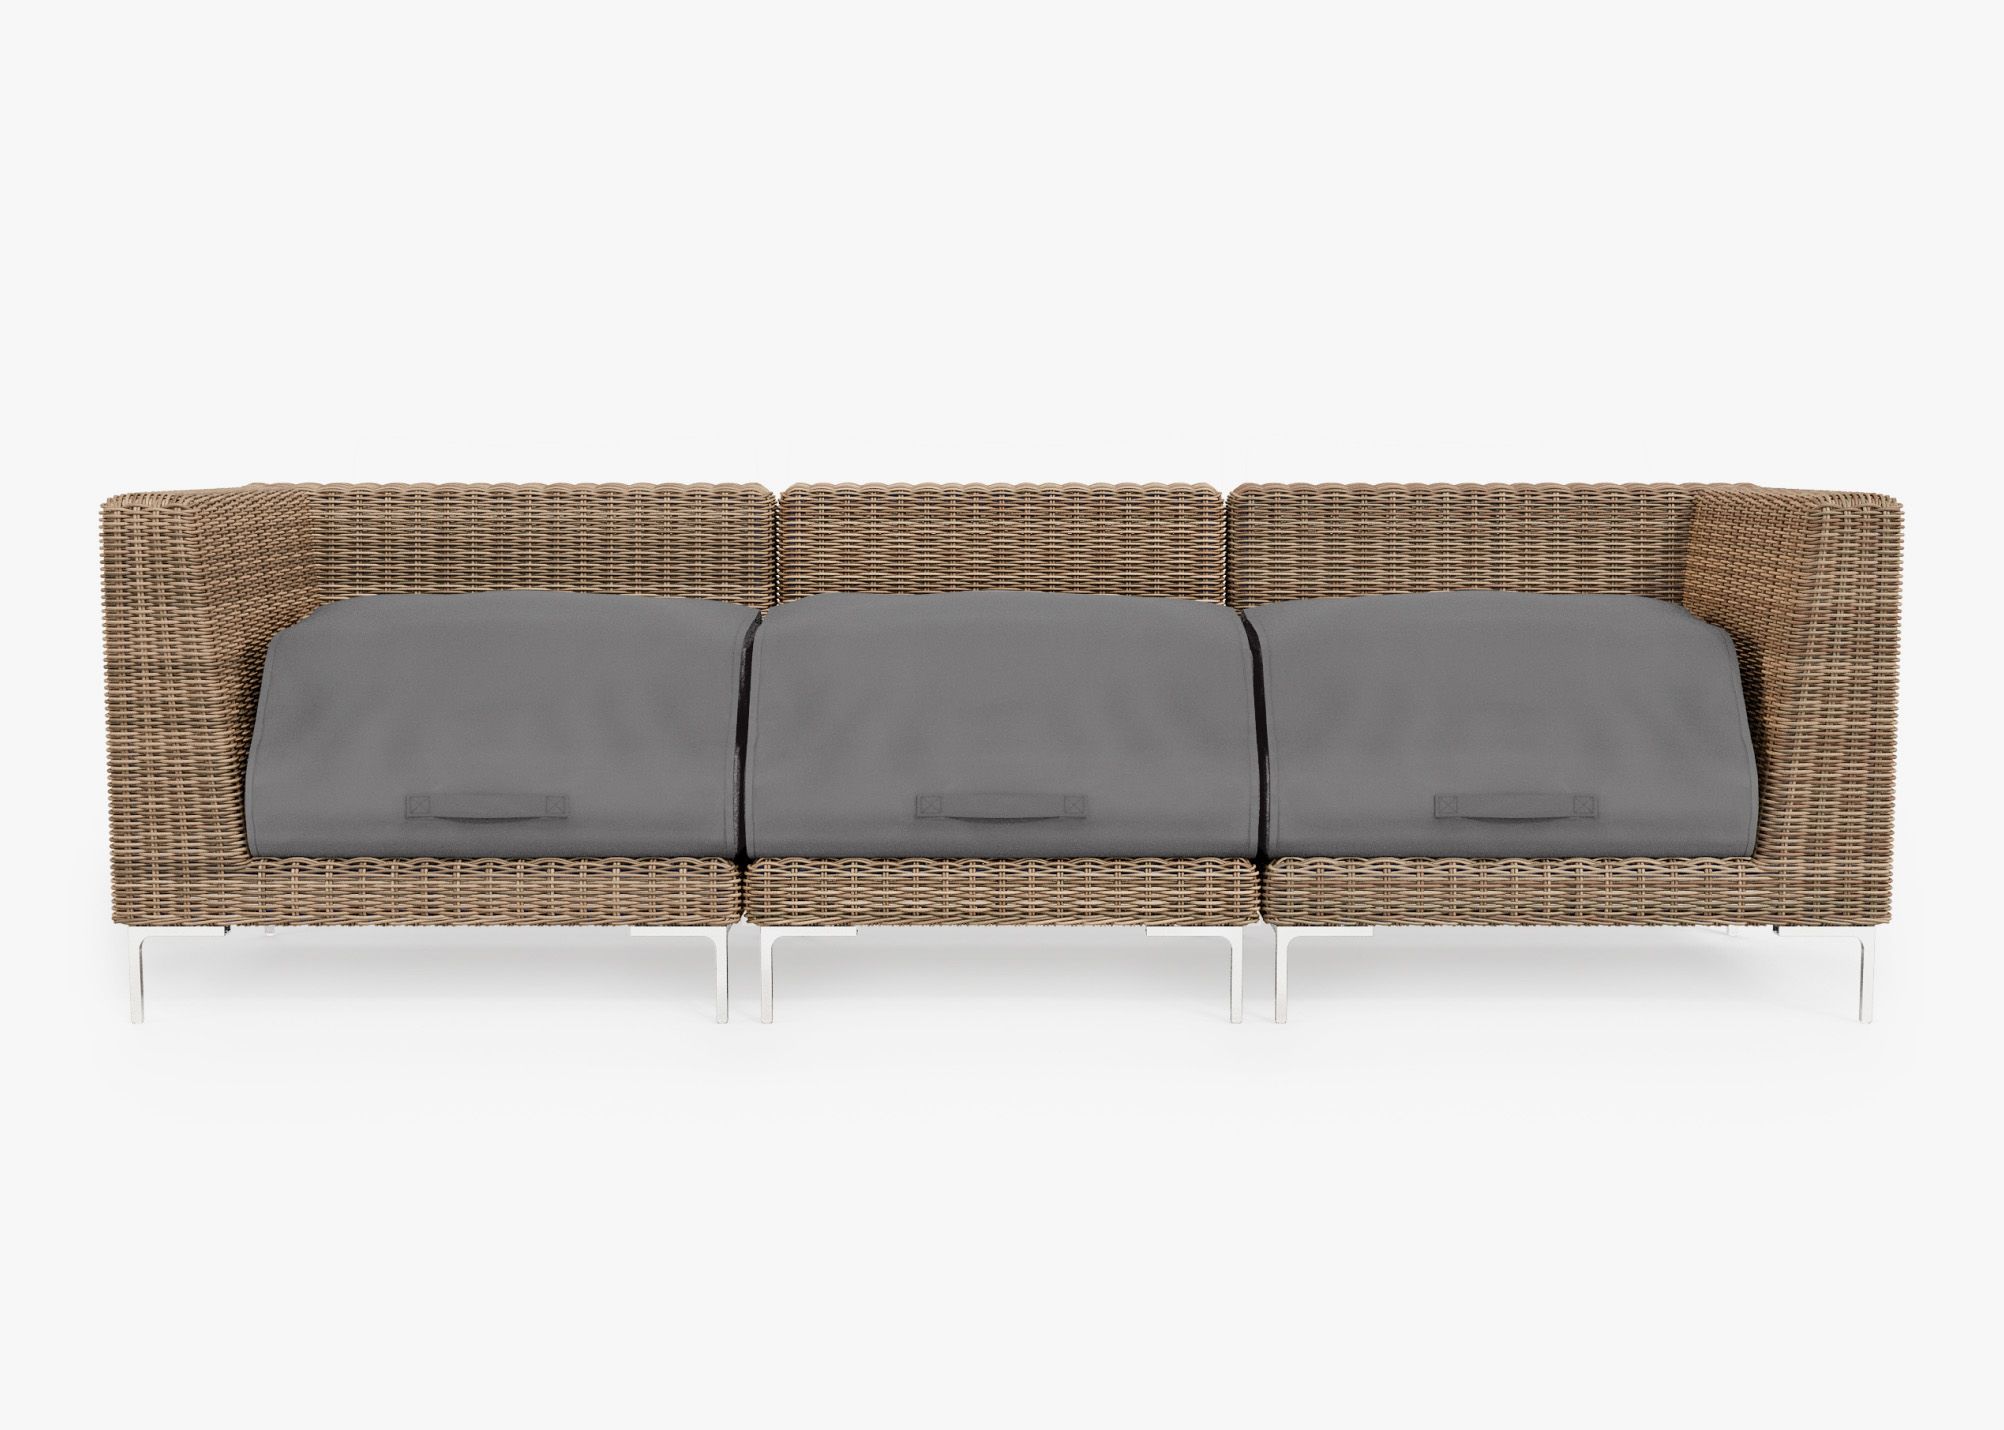 Brown Wicker Outdoor Sofa - 3 Seat shown with the OuterShell outdoor cushion cover, offering exclusive integrated protection.